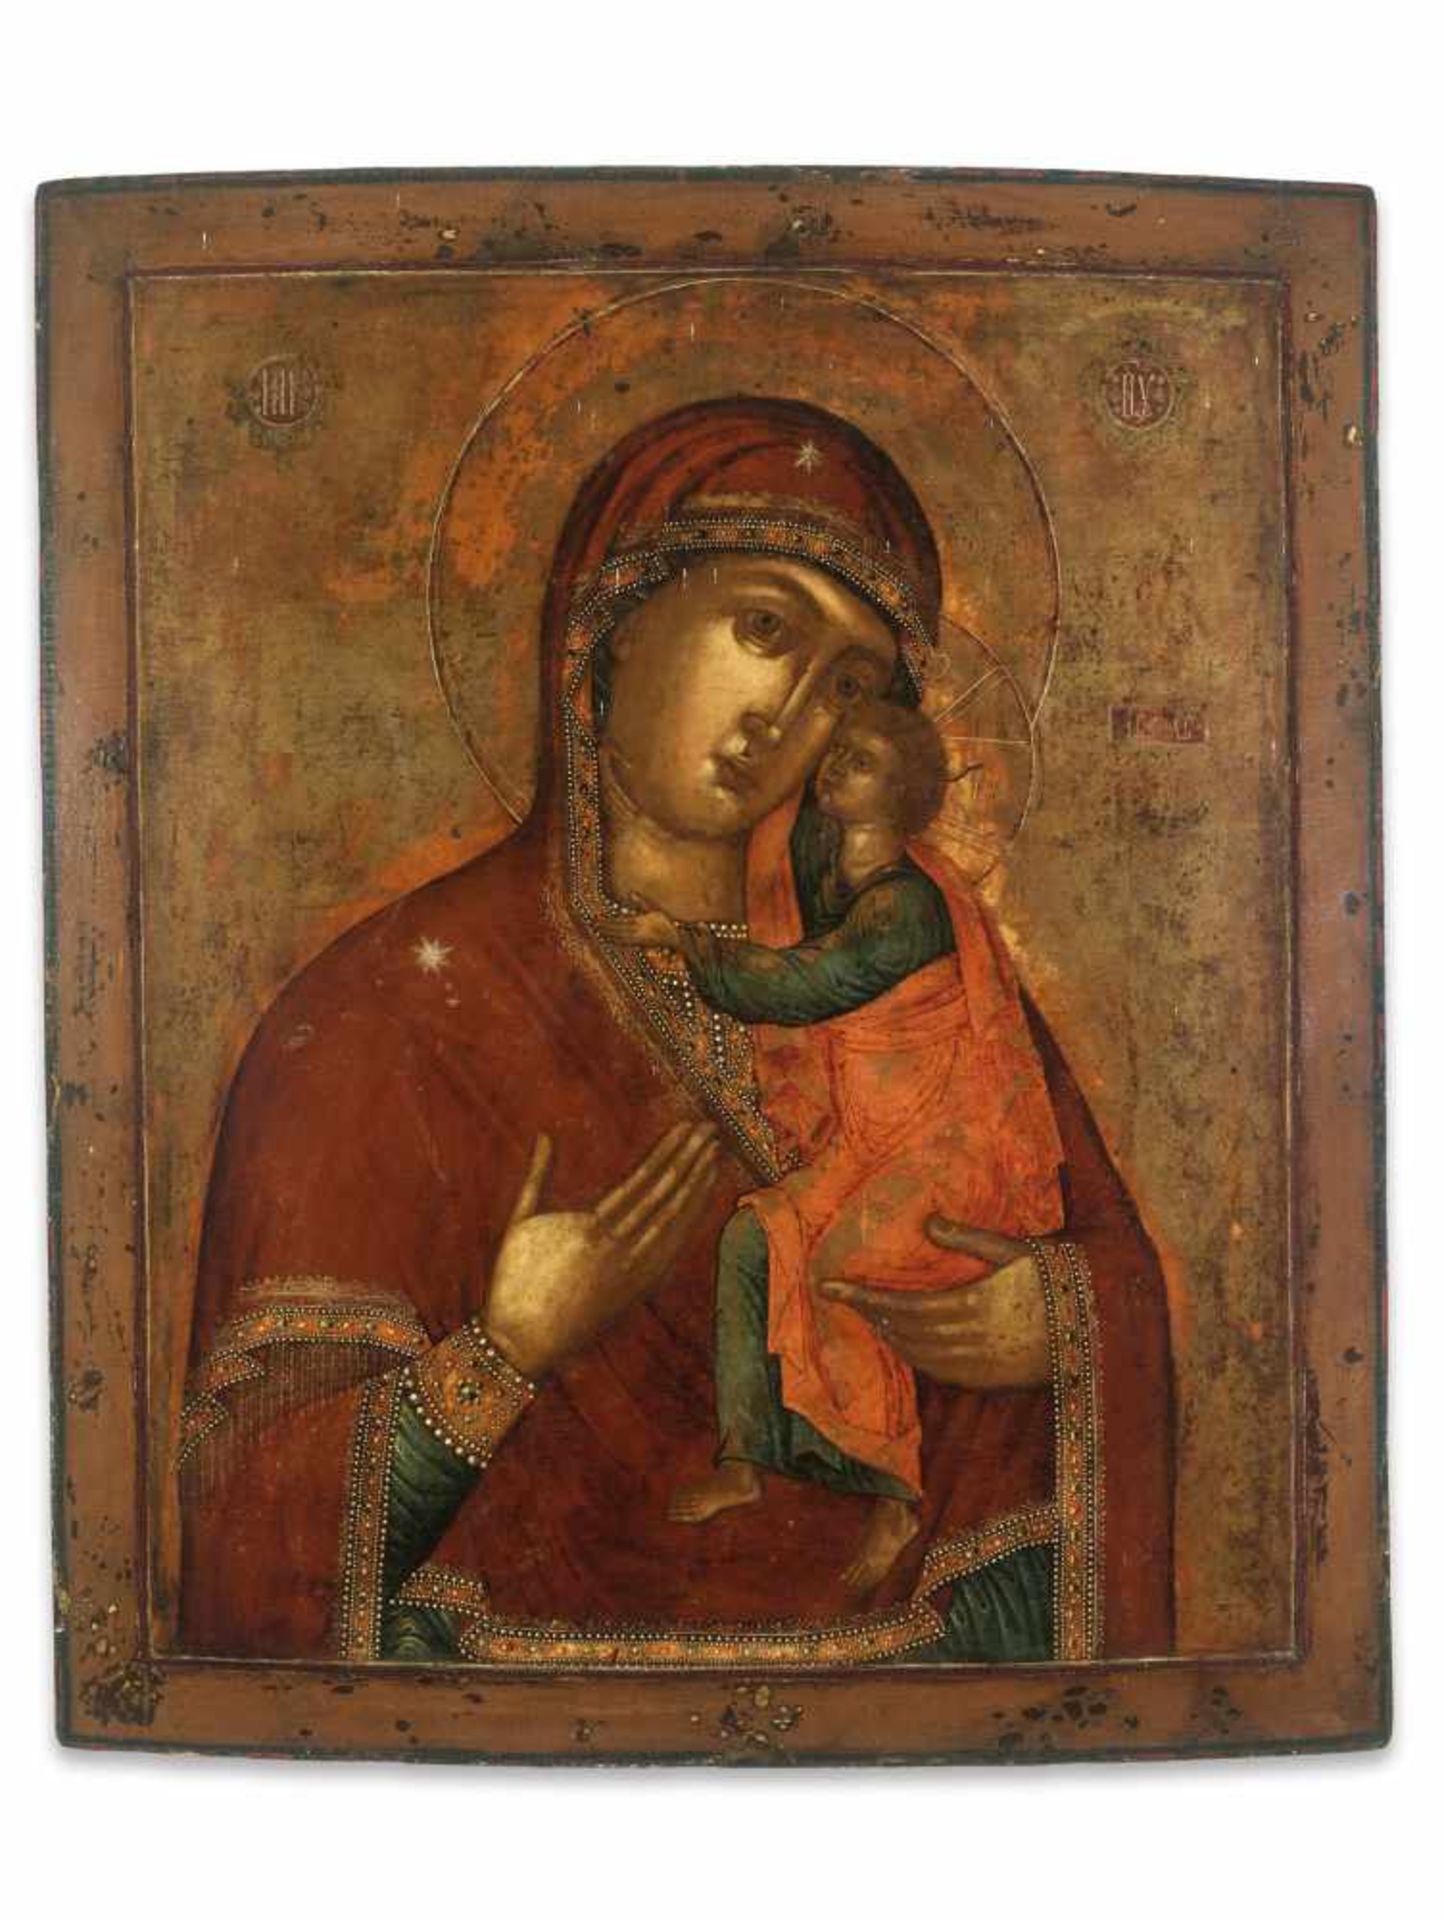 LARGE RUSSIAN ‘ELEUSA’ ICON, VIRGIN OF TENDERNESS, 19th CENTURYWood, polychrome egg